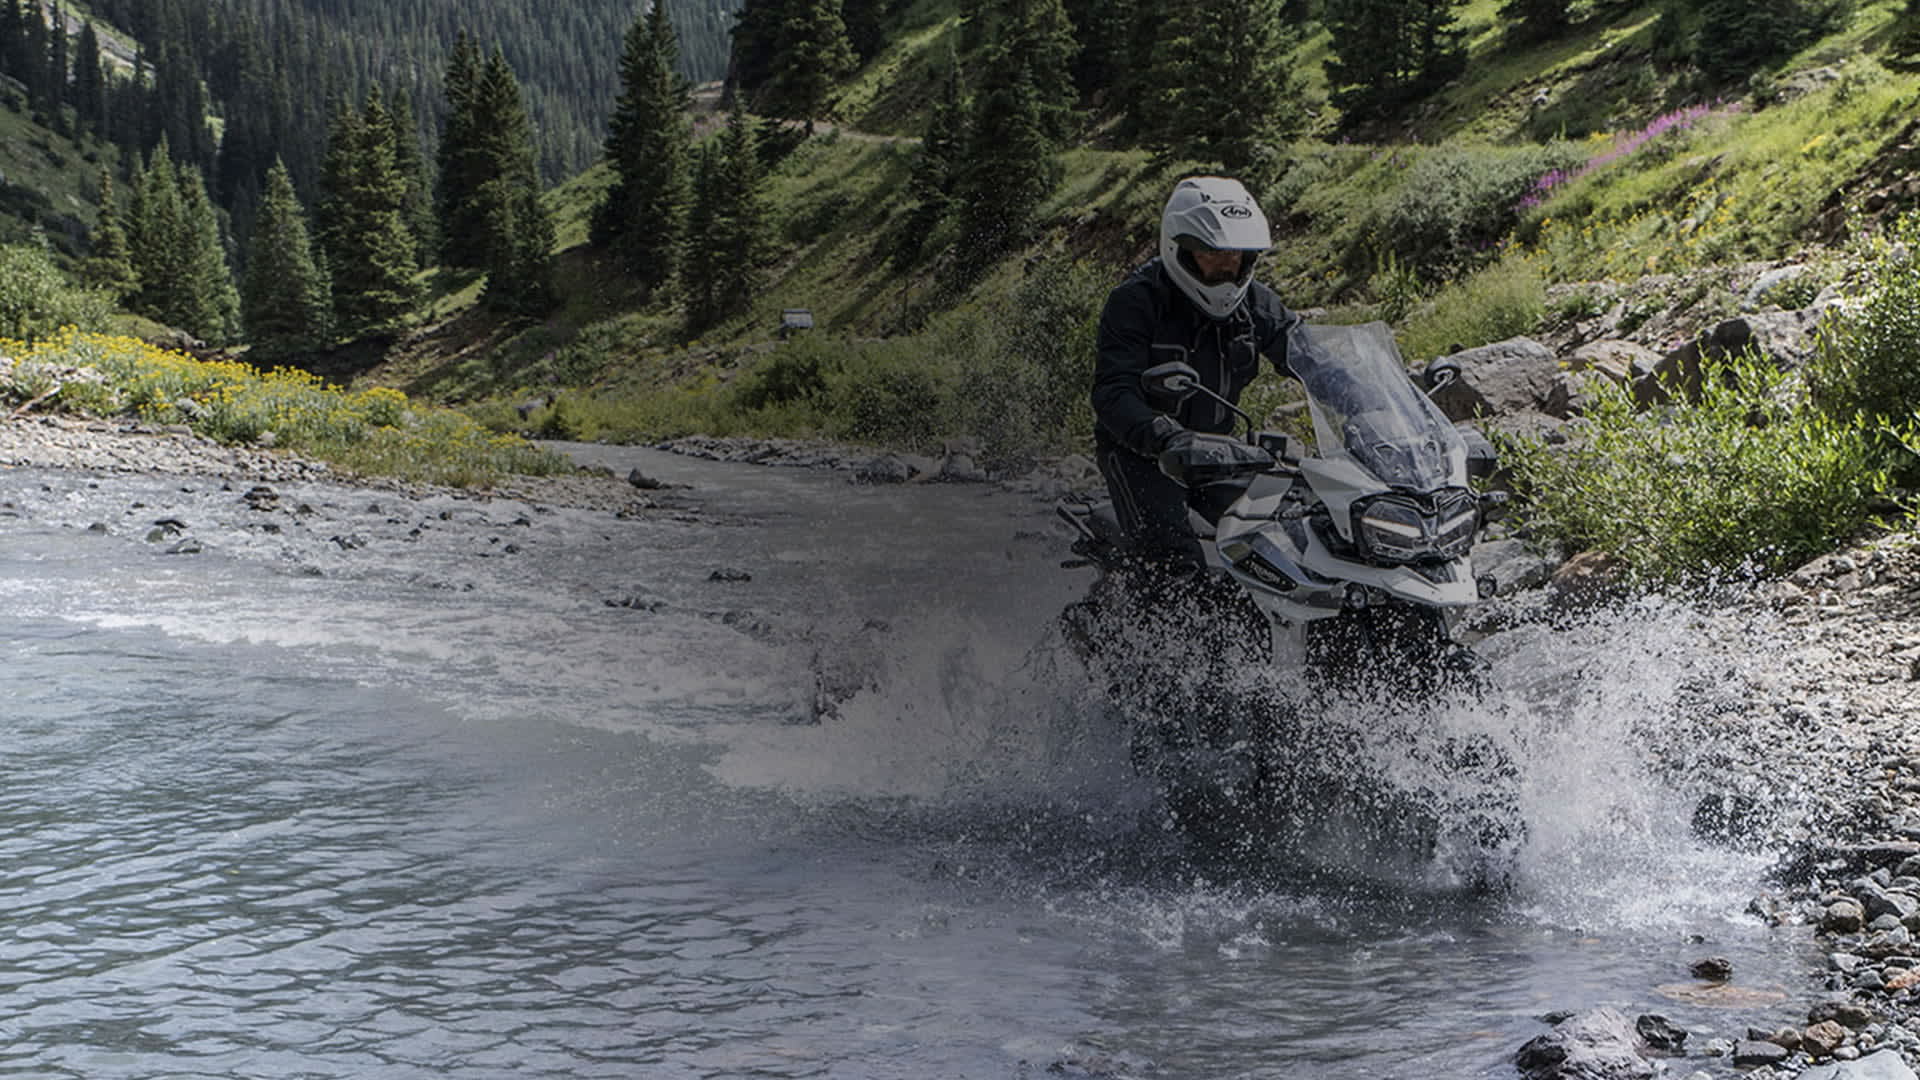 Person riding a Tiger 1200 through a stream of water.